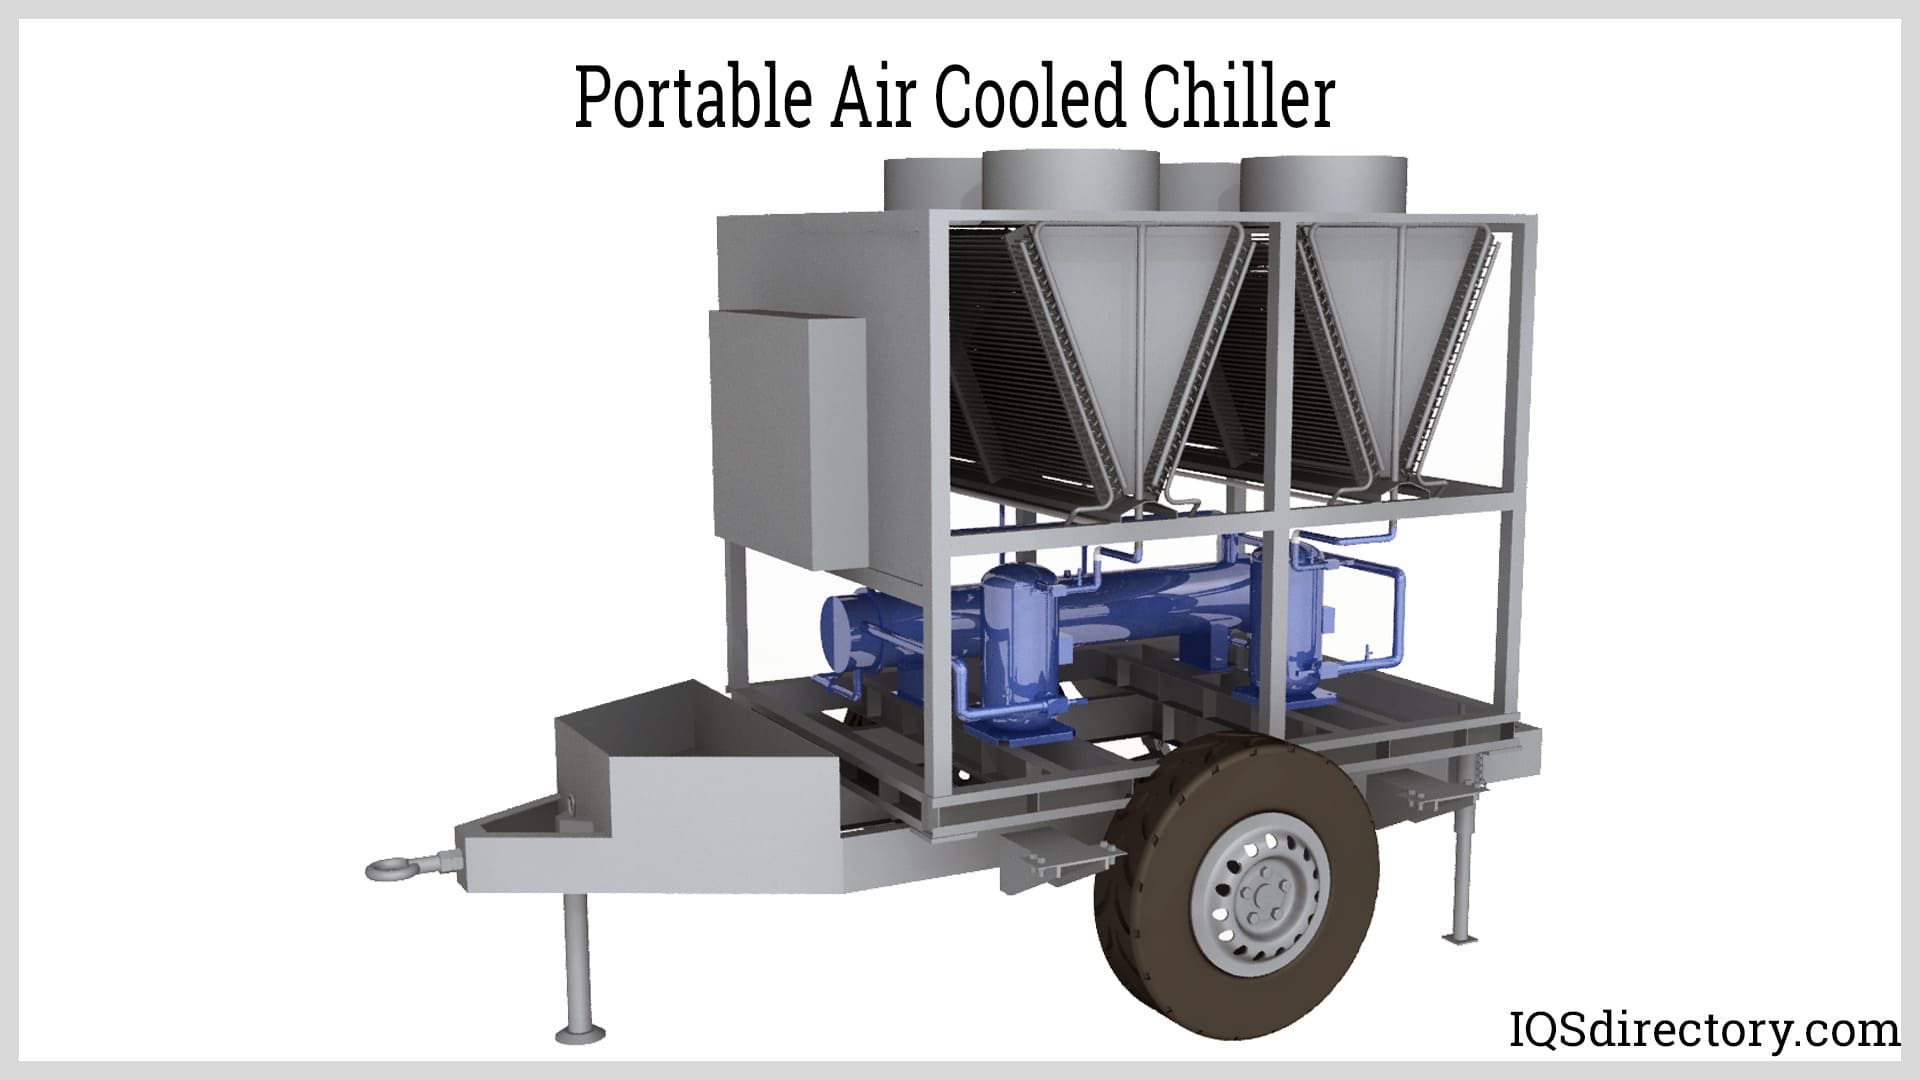 Portable Air Cooled Chiller